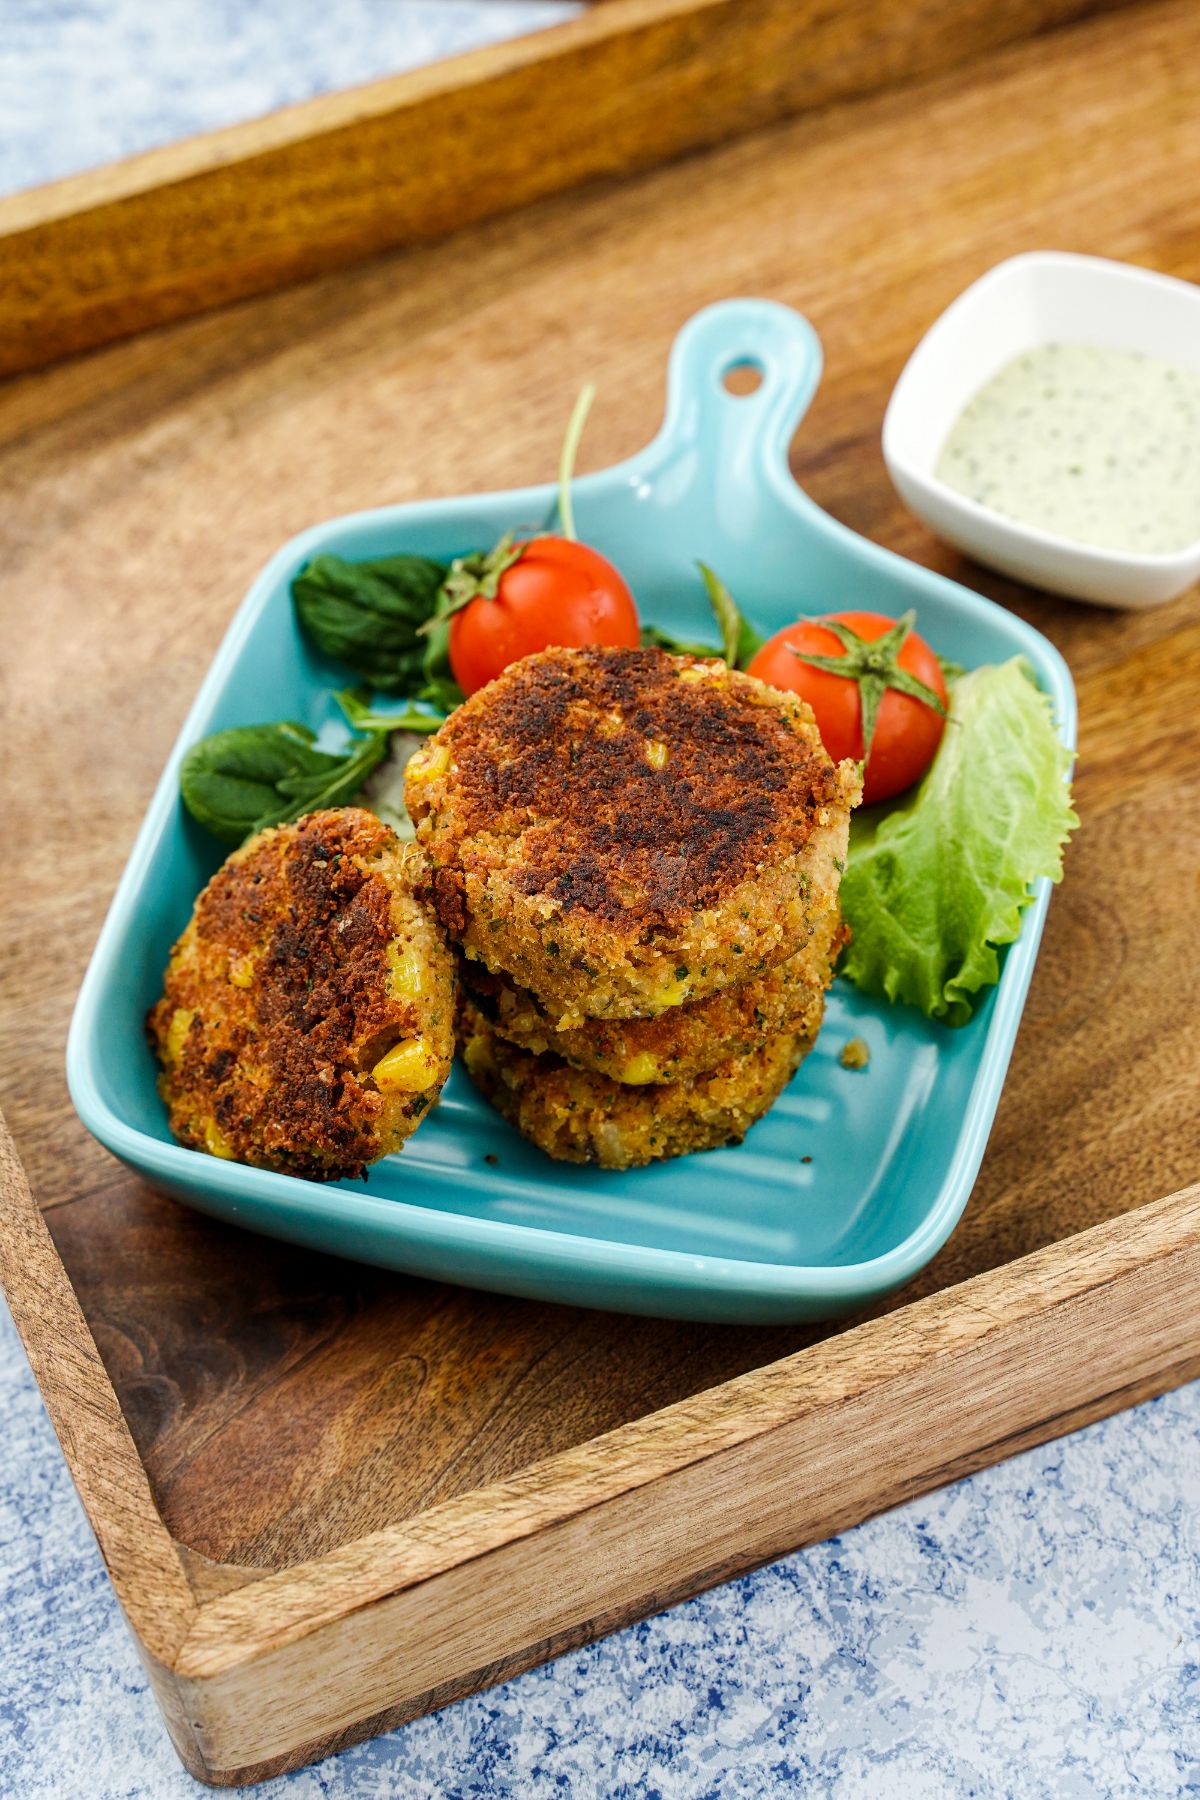 fresh tomato and lettuce on plate beside stack of chickpea corn patties